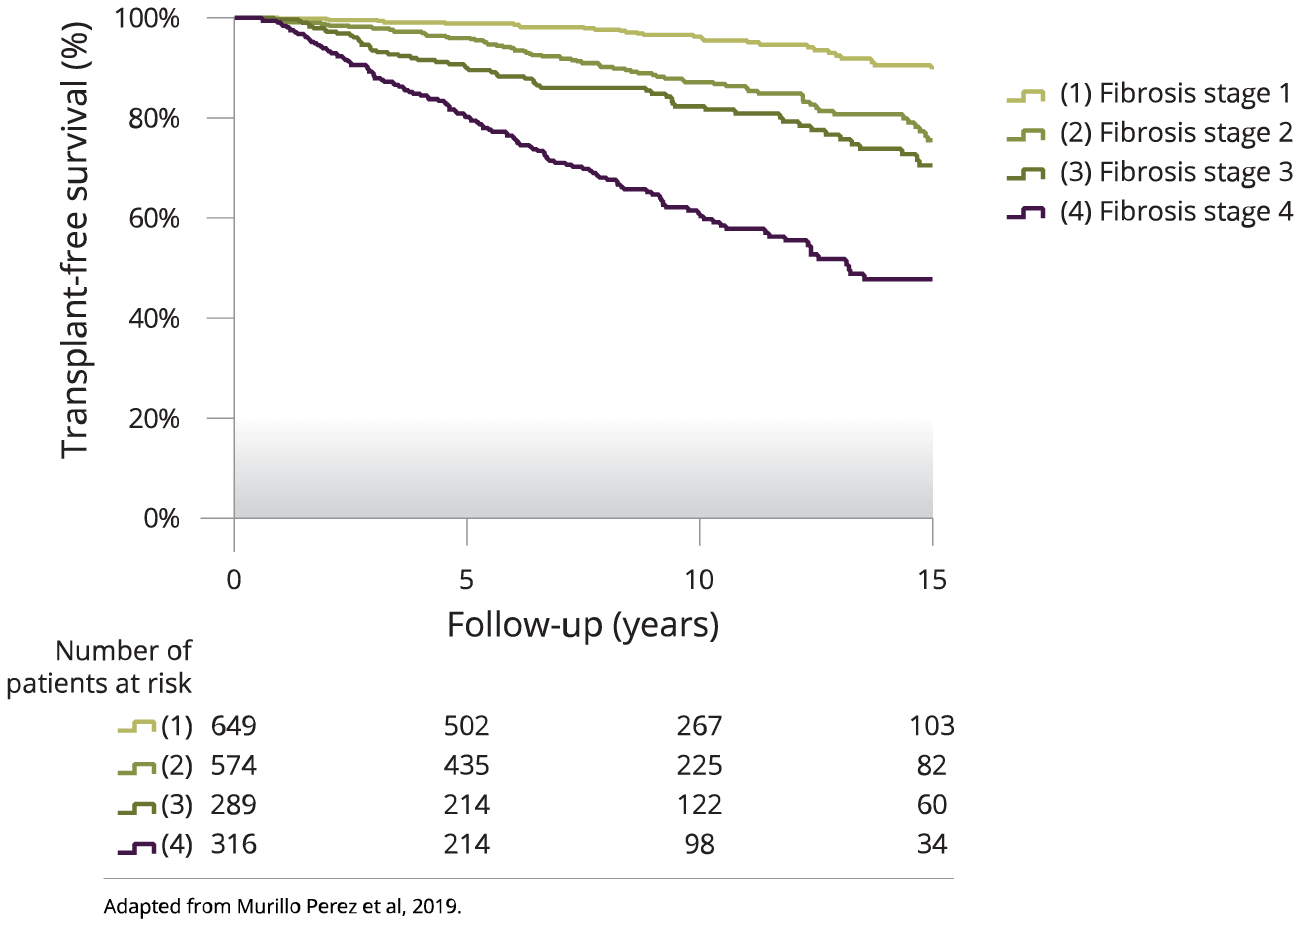 Graph showing transplant-free survival estimates according to baseline fibrosis stage